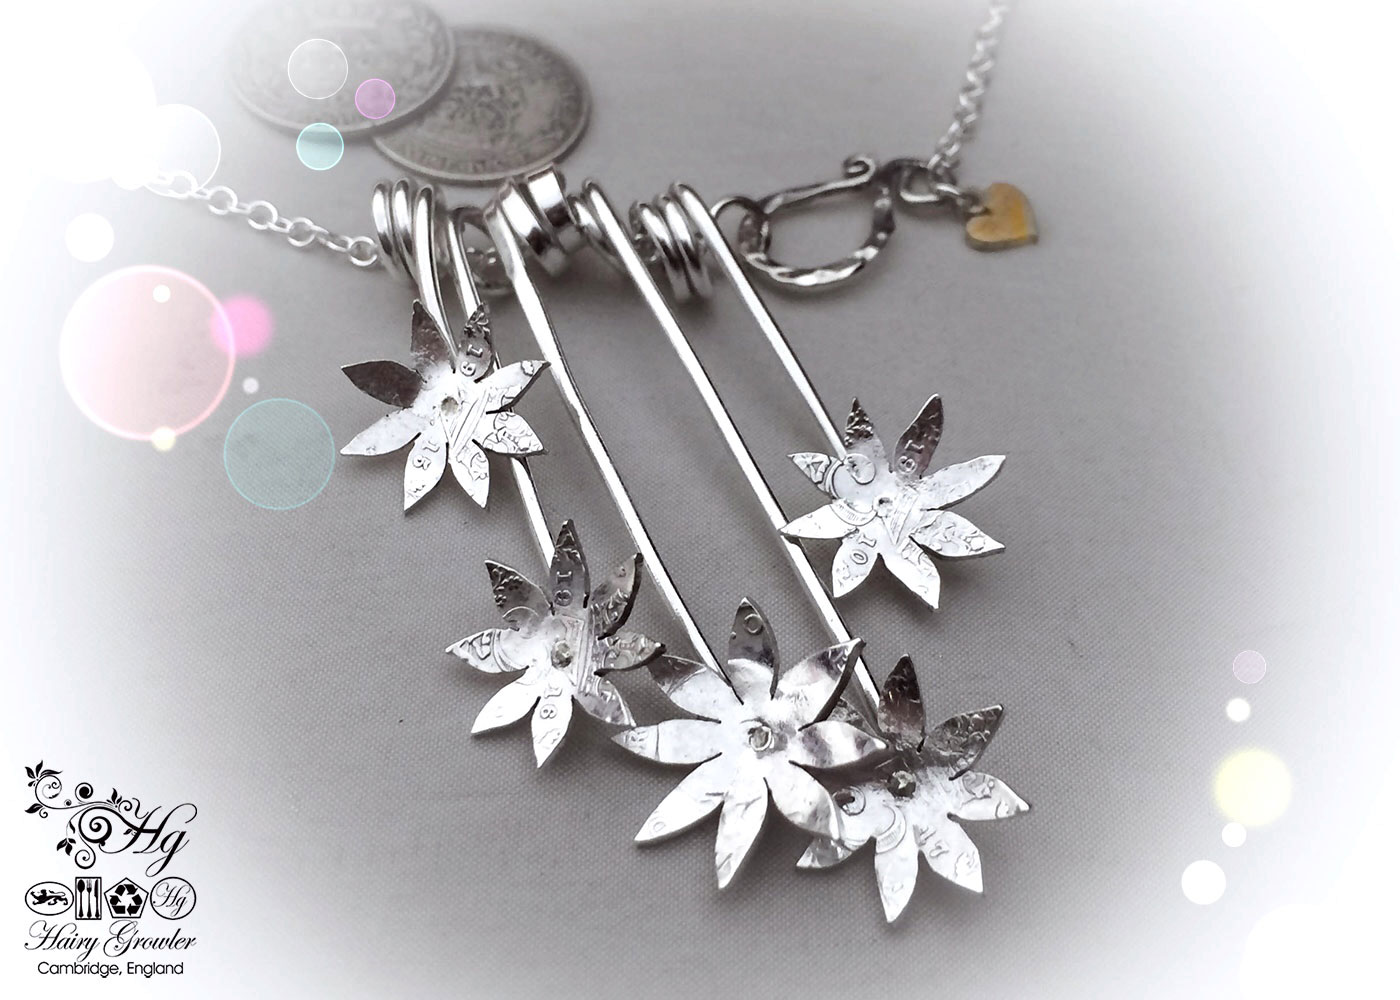 Handcrafted and recycled sterling silver beautiful flower necklace made from silver sixpence coins